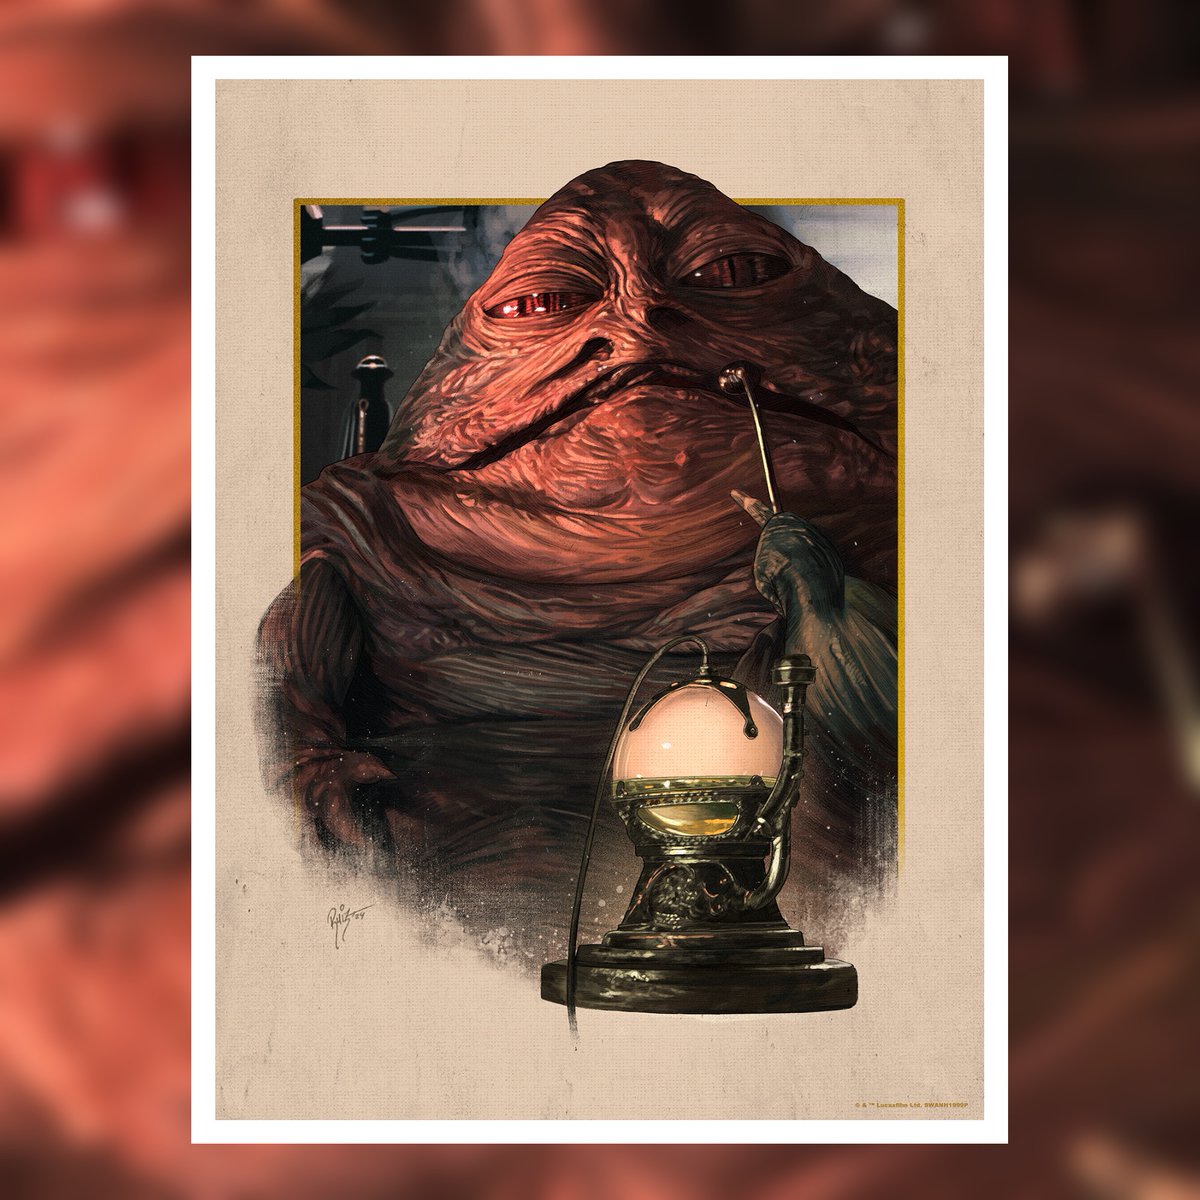 JABBA IS NOW SOLD OUT!!